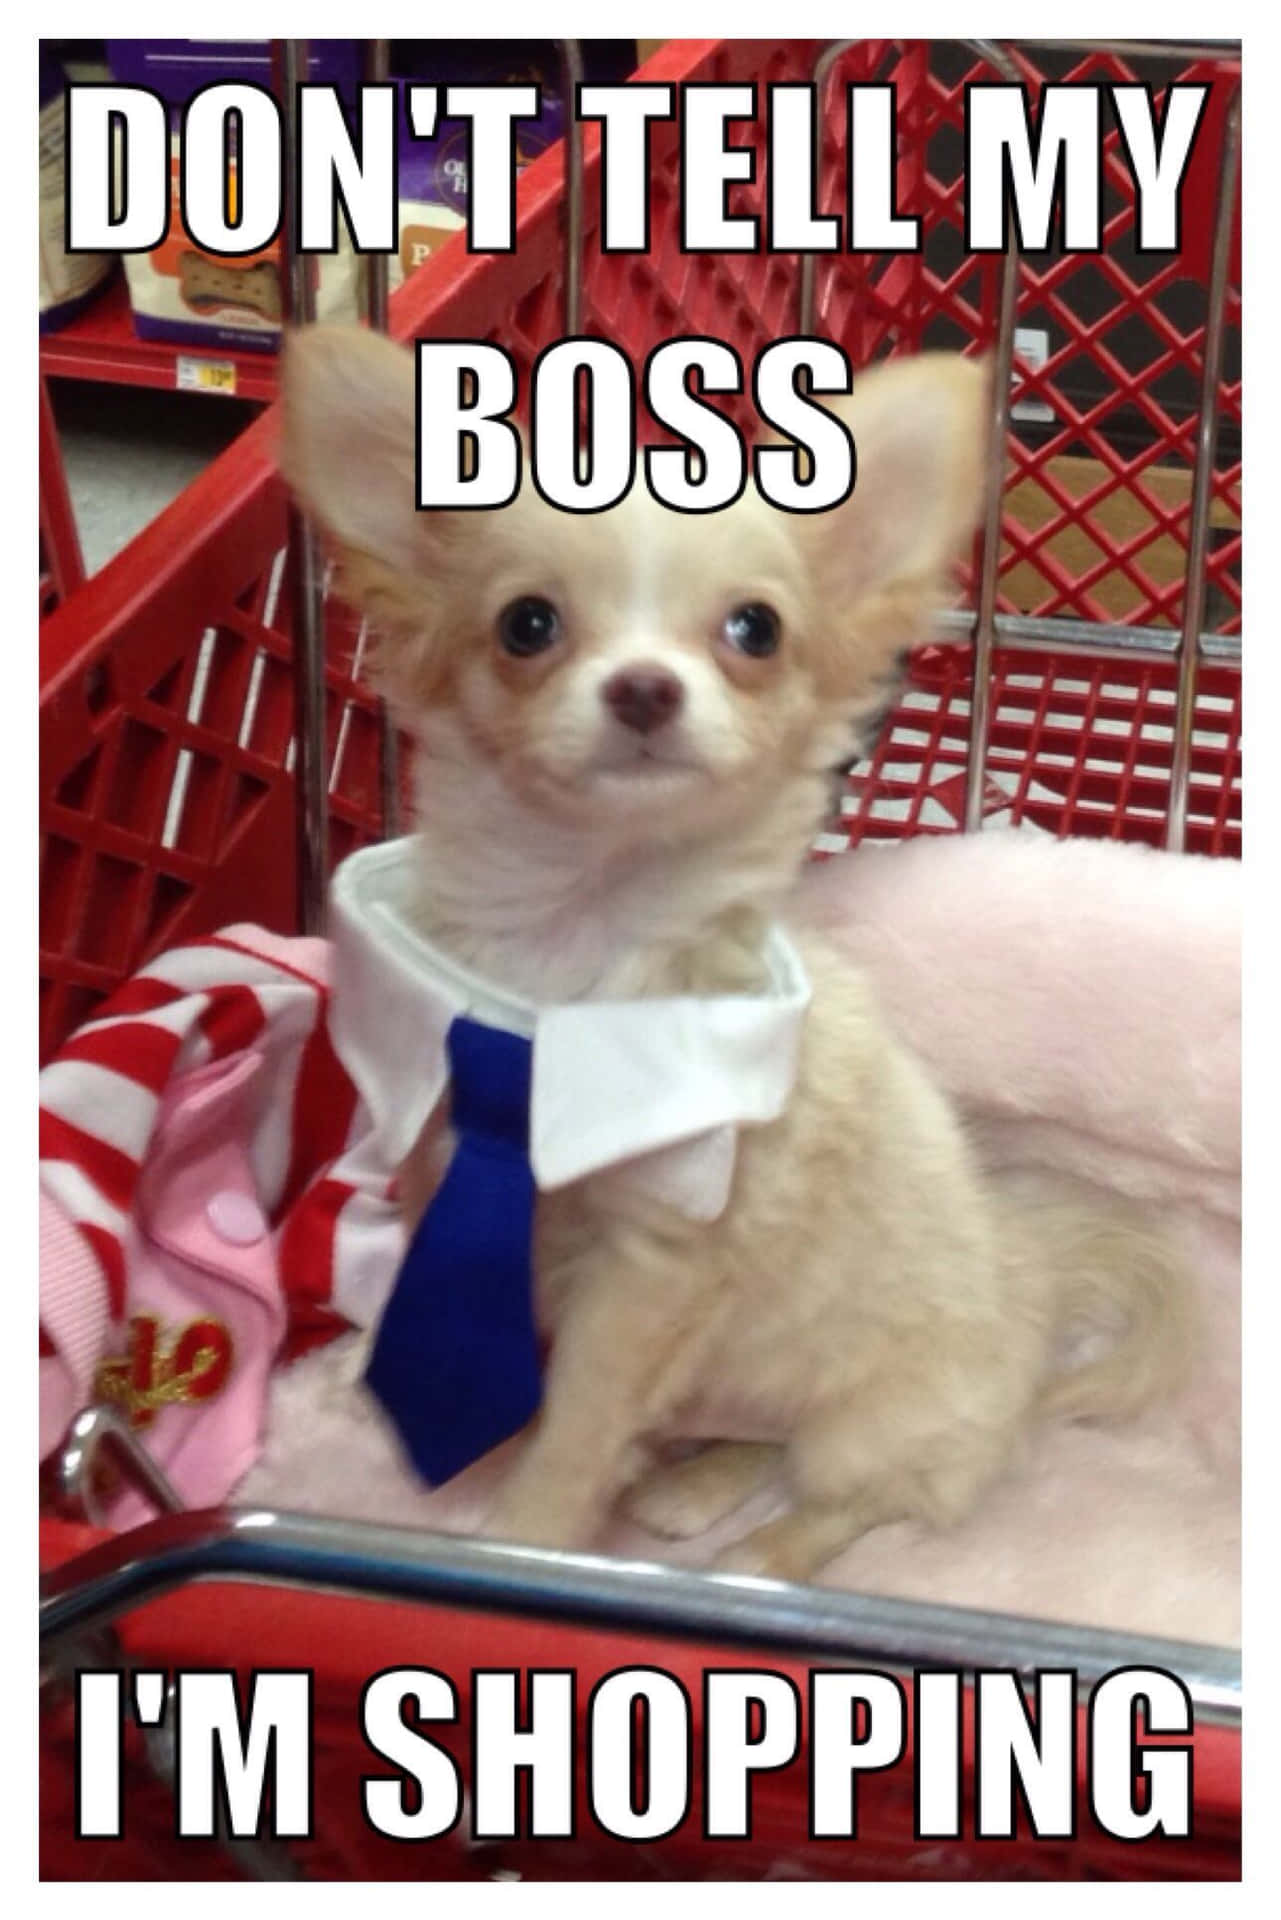 Funny Chihuahua Boss Pictures